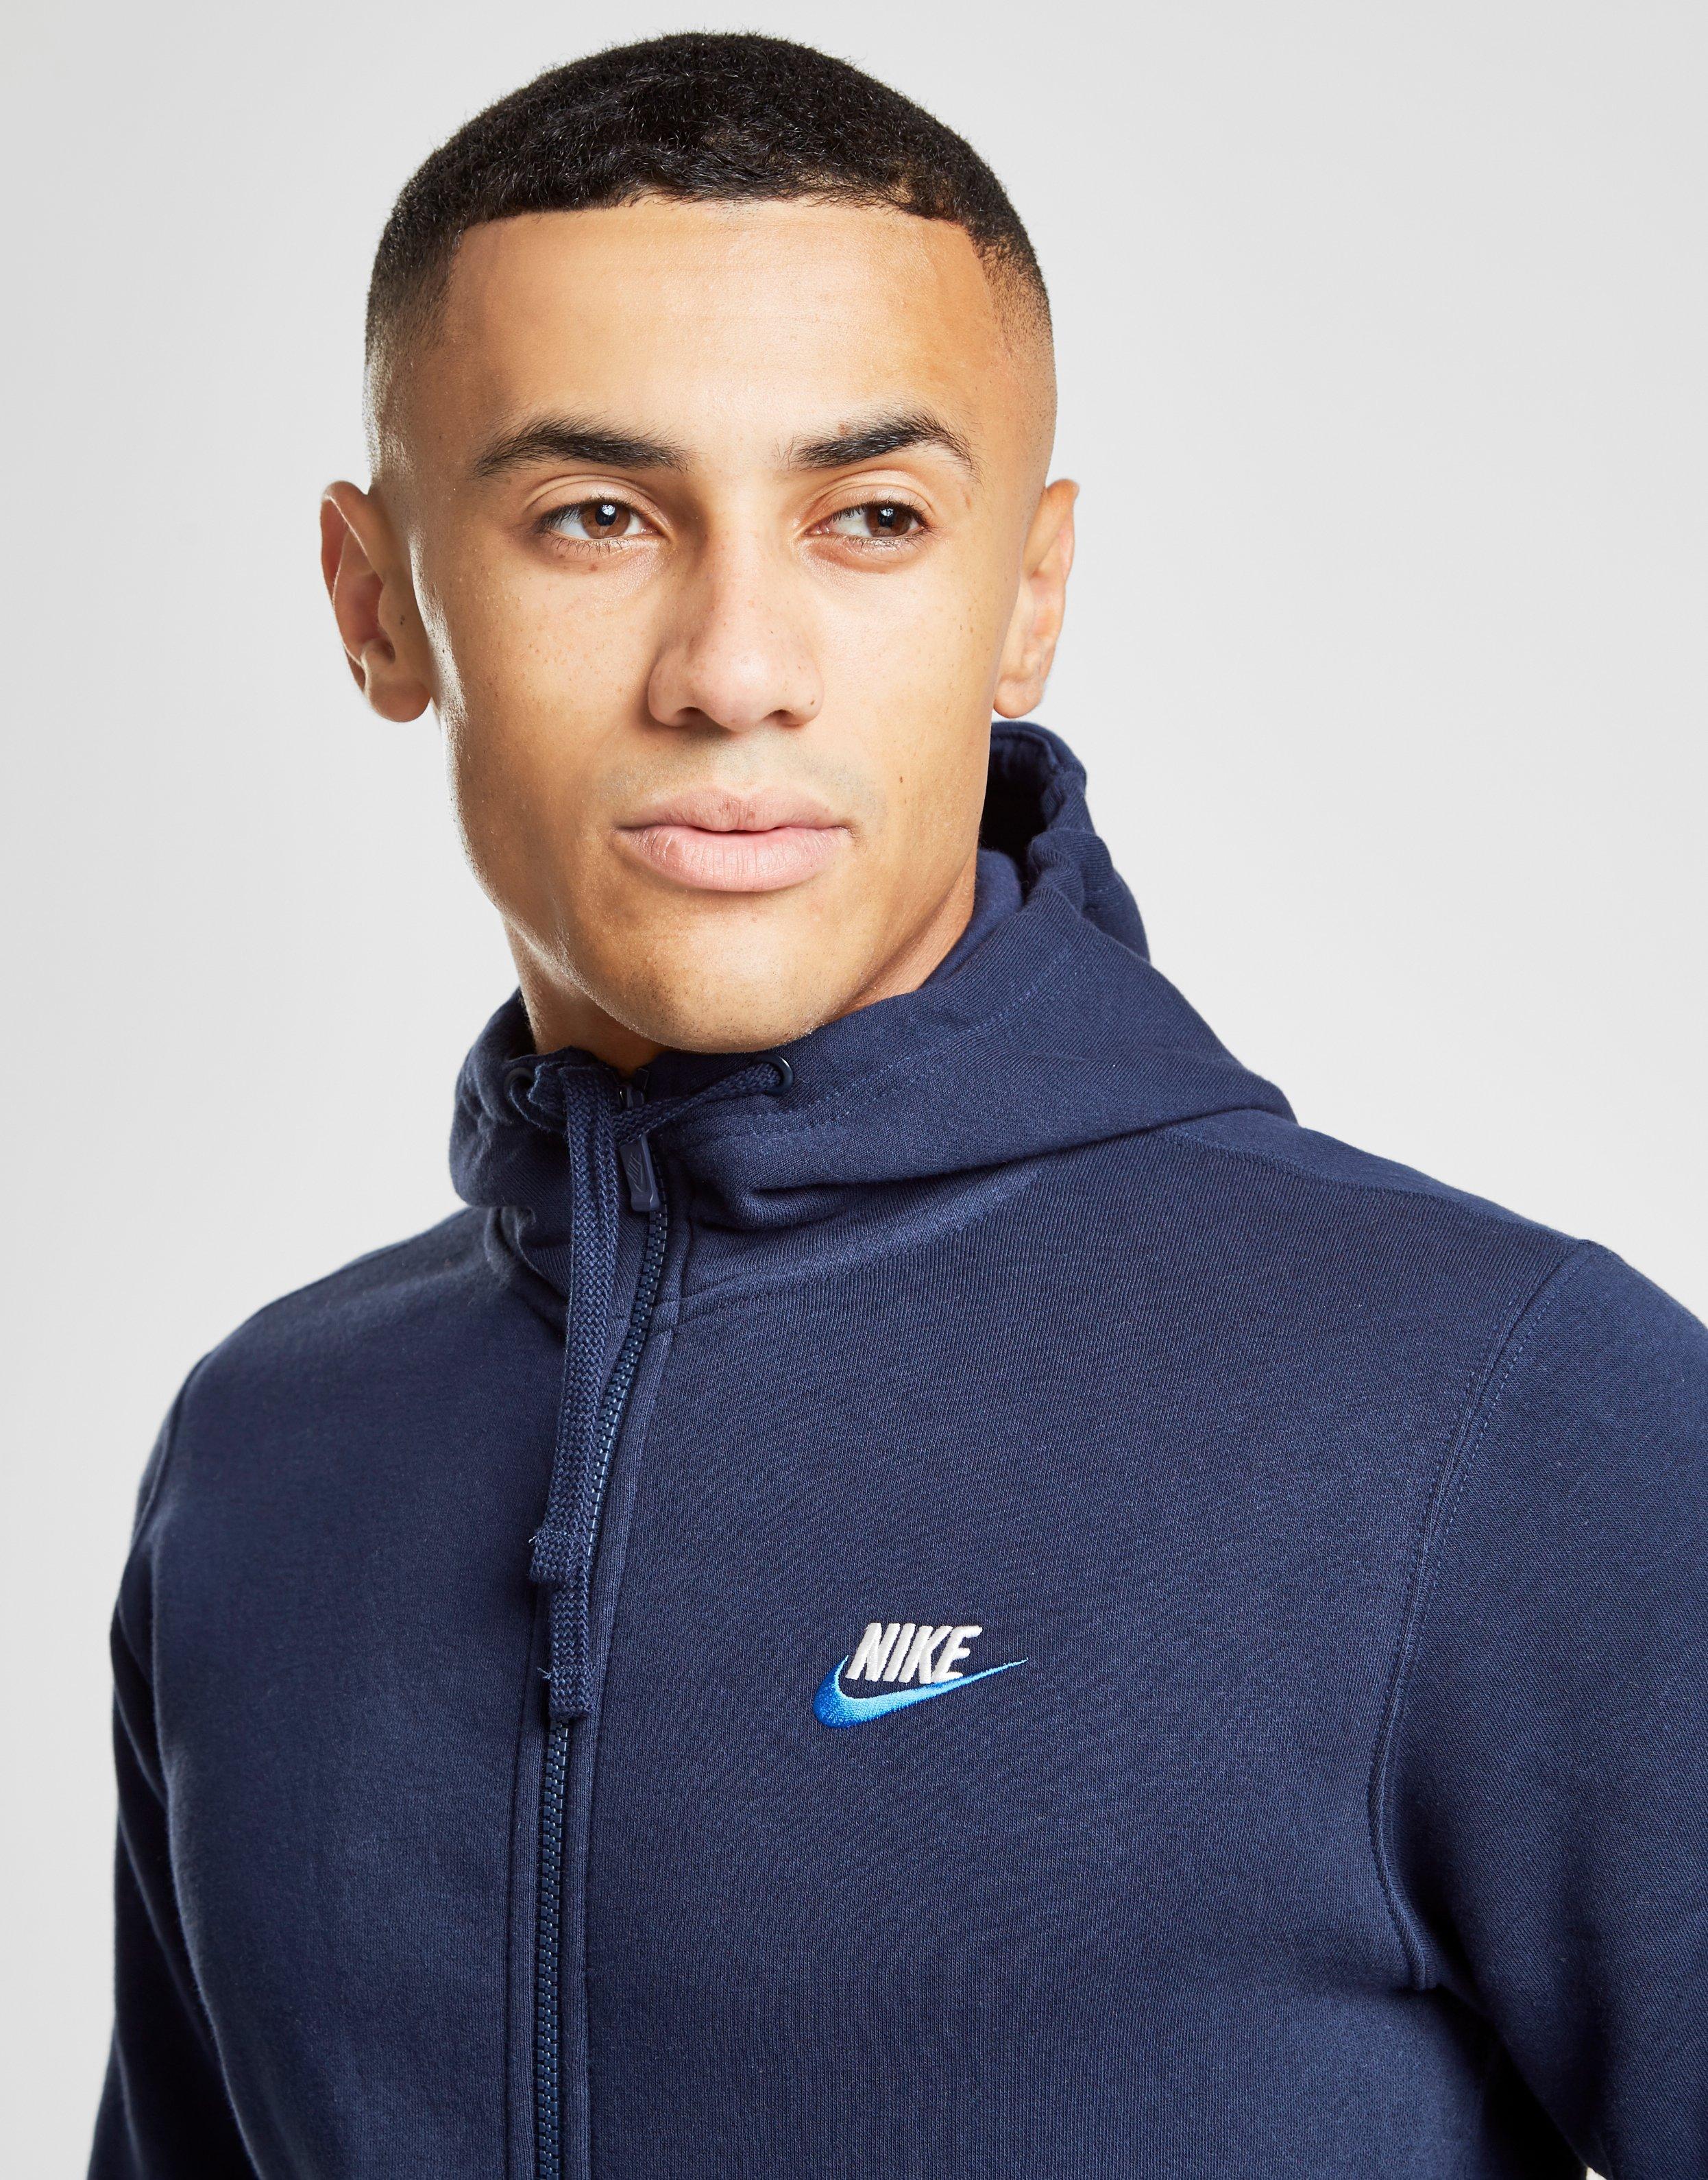 Nike Cotton Foundation Full Zip Hoodie in Navy (Blue) for Men - Lyst